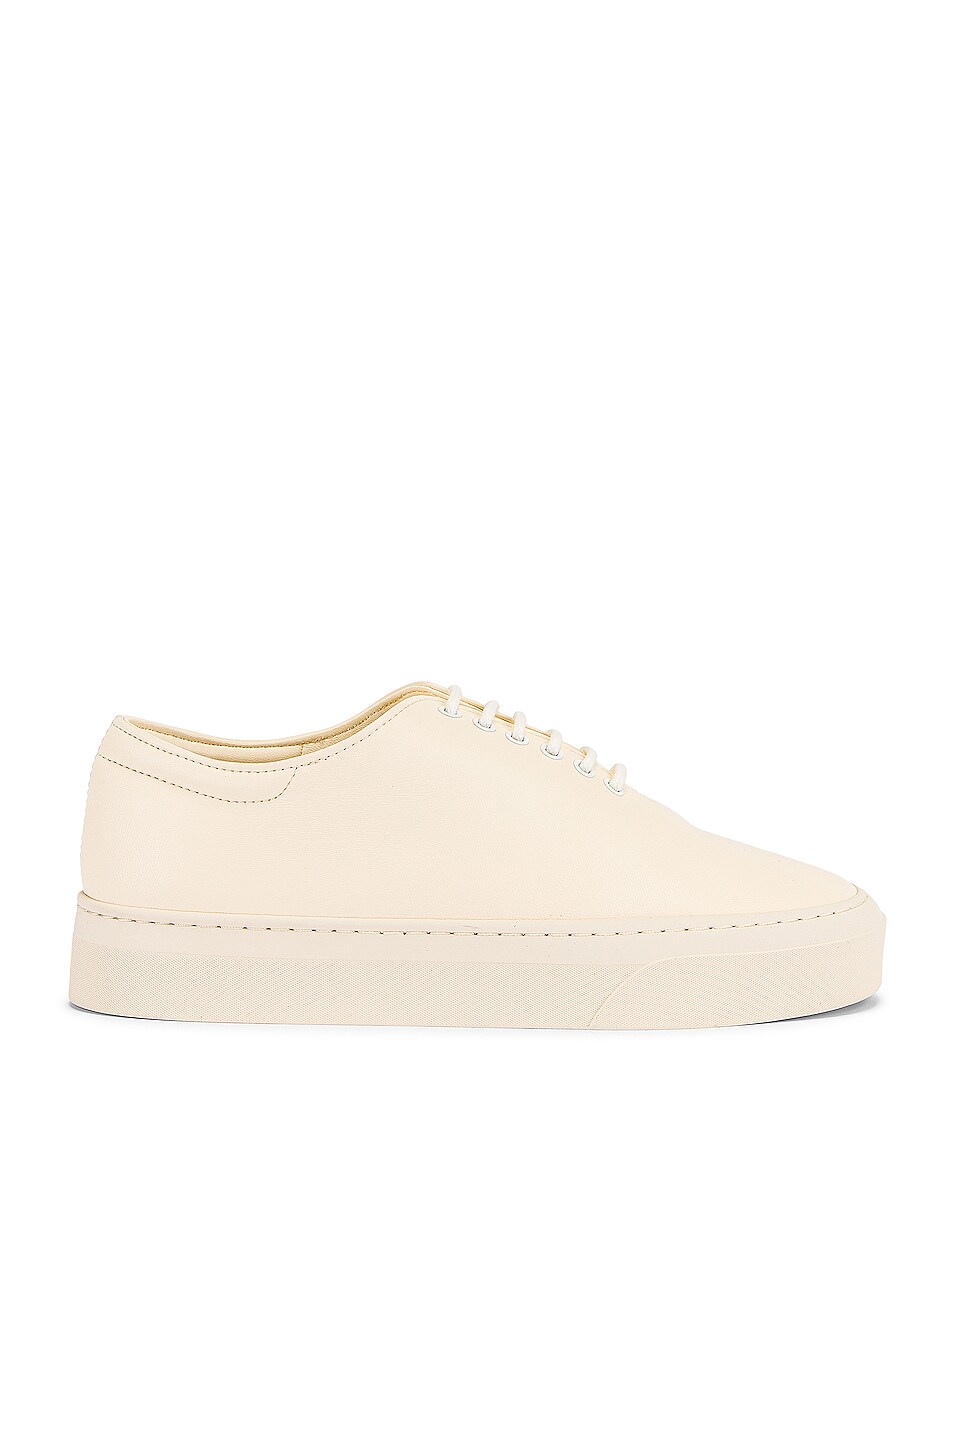 Image 1 of The Row Marie H Lace Up Sneakers in Milk